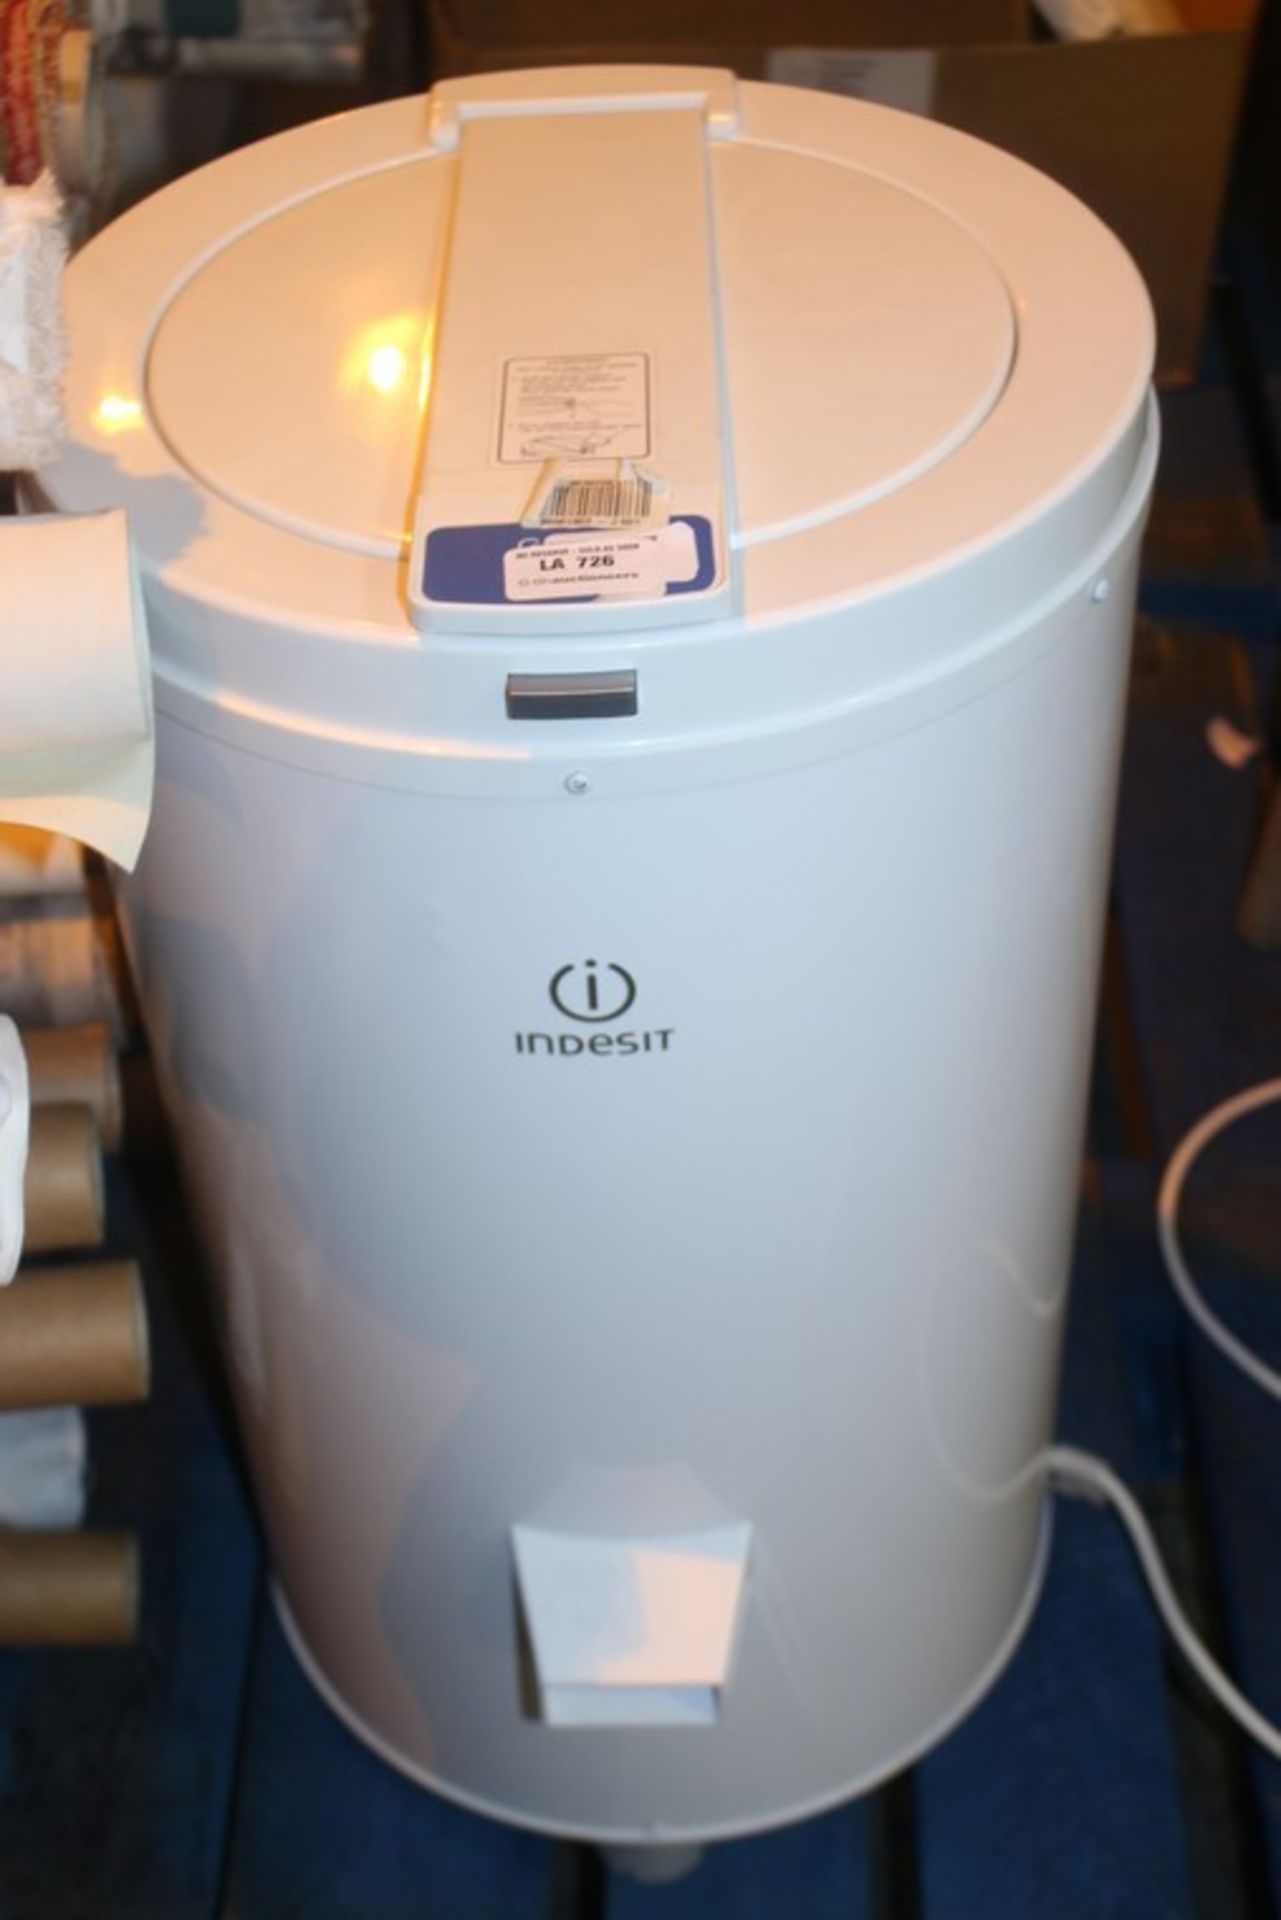 1 x INDESIT TOP LADING DRYER IN WHITE (09/11/17) *PLEASE NOTE THAT THE BID PRICE IS MULTIPLIED BY